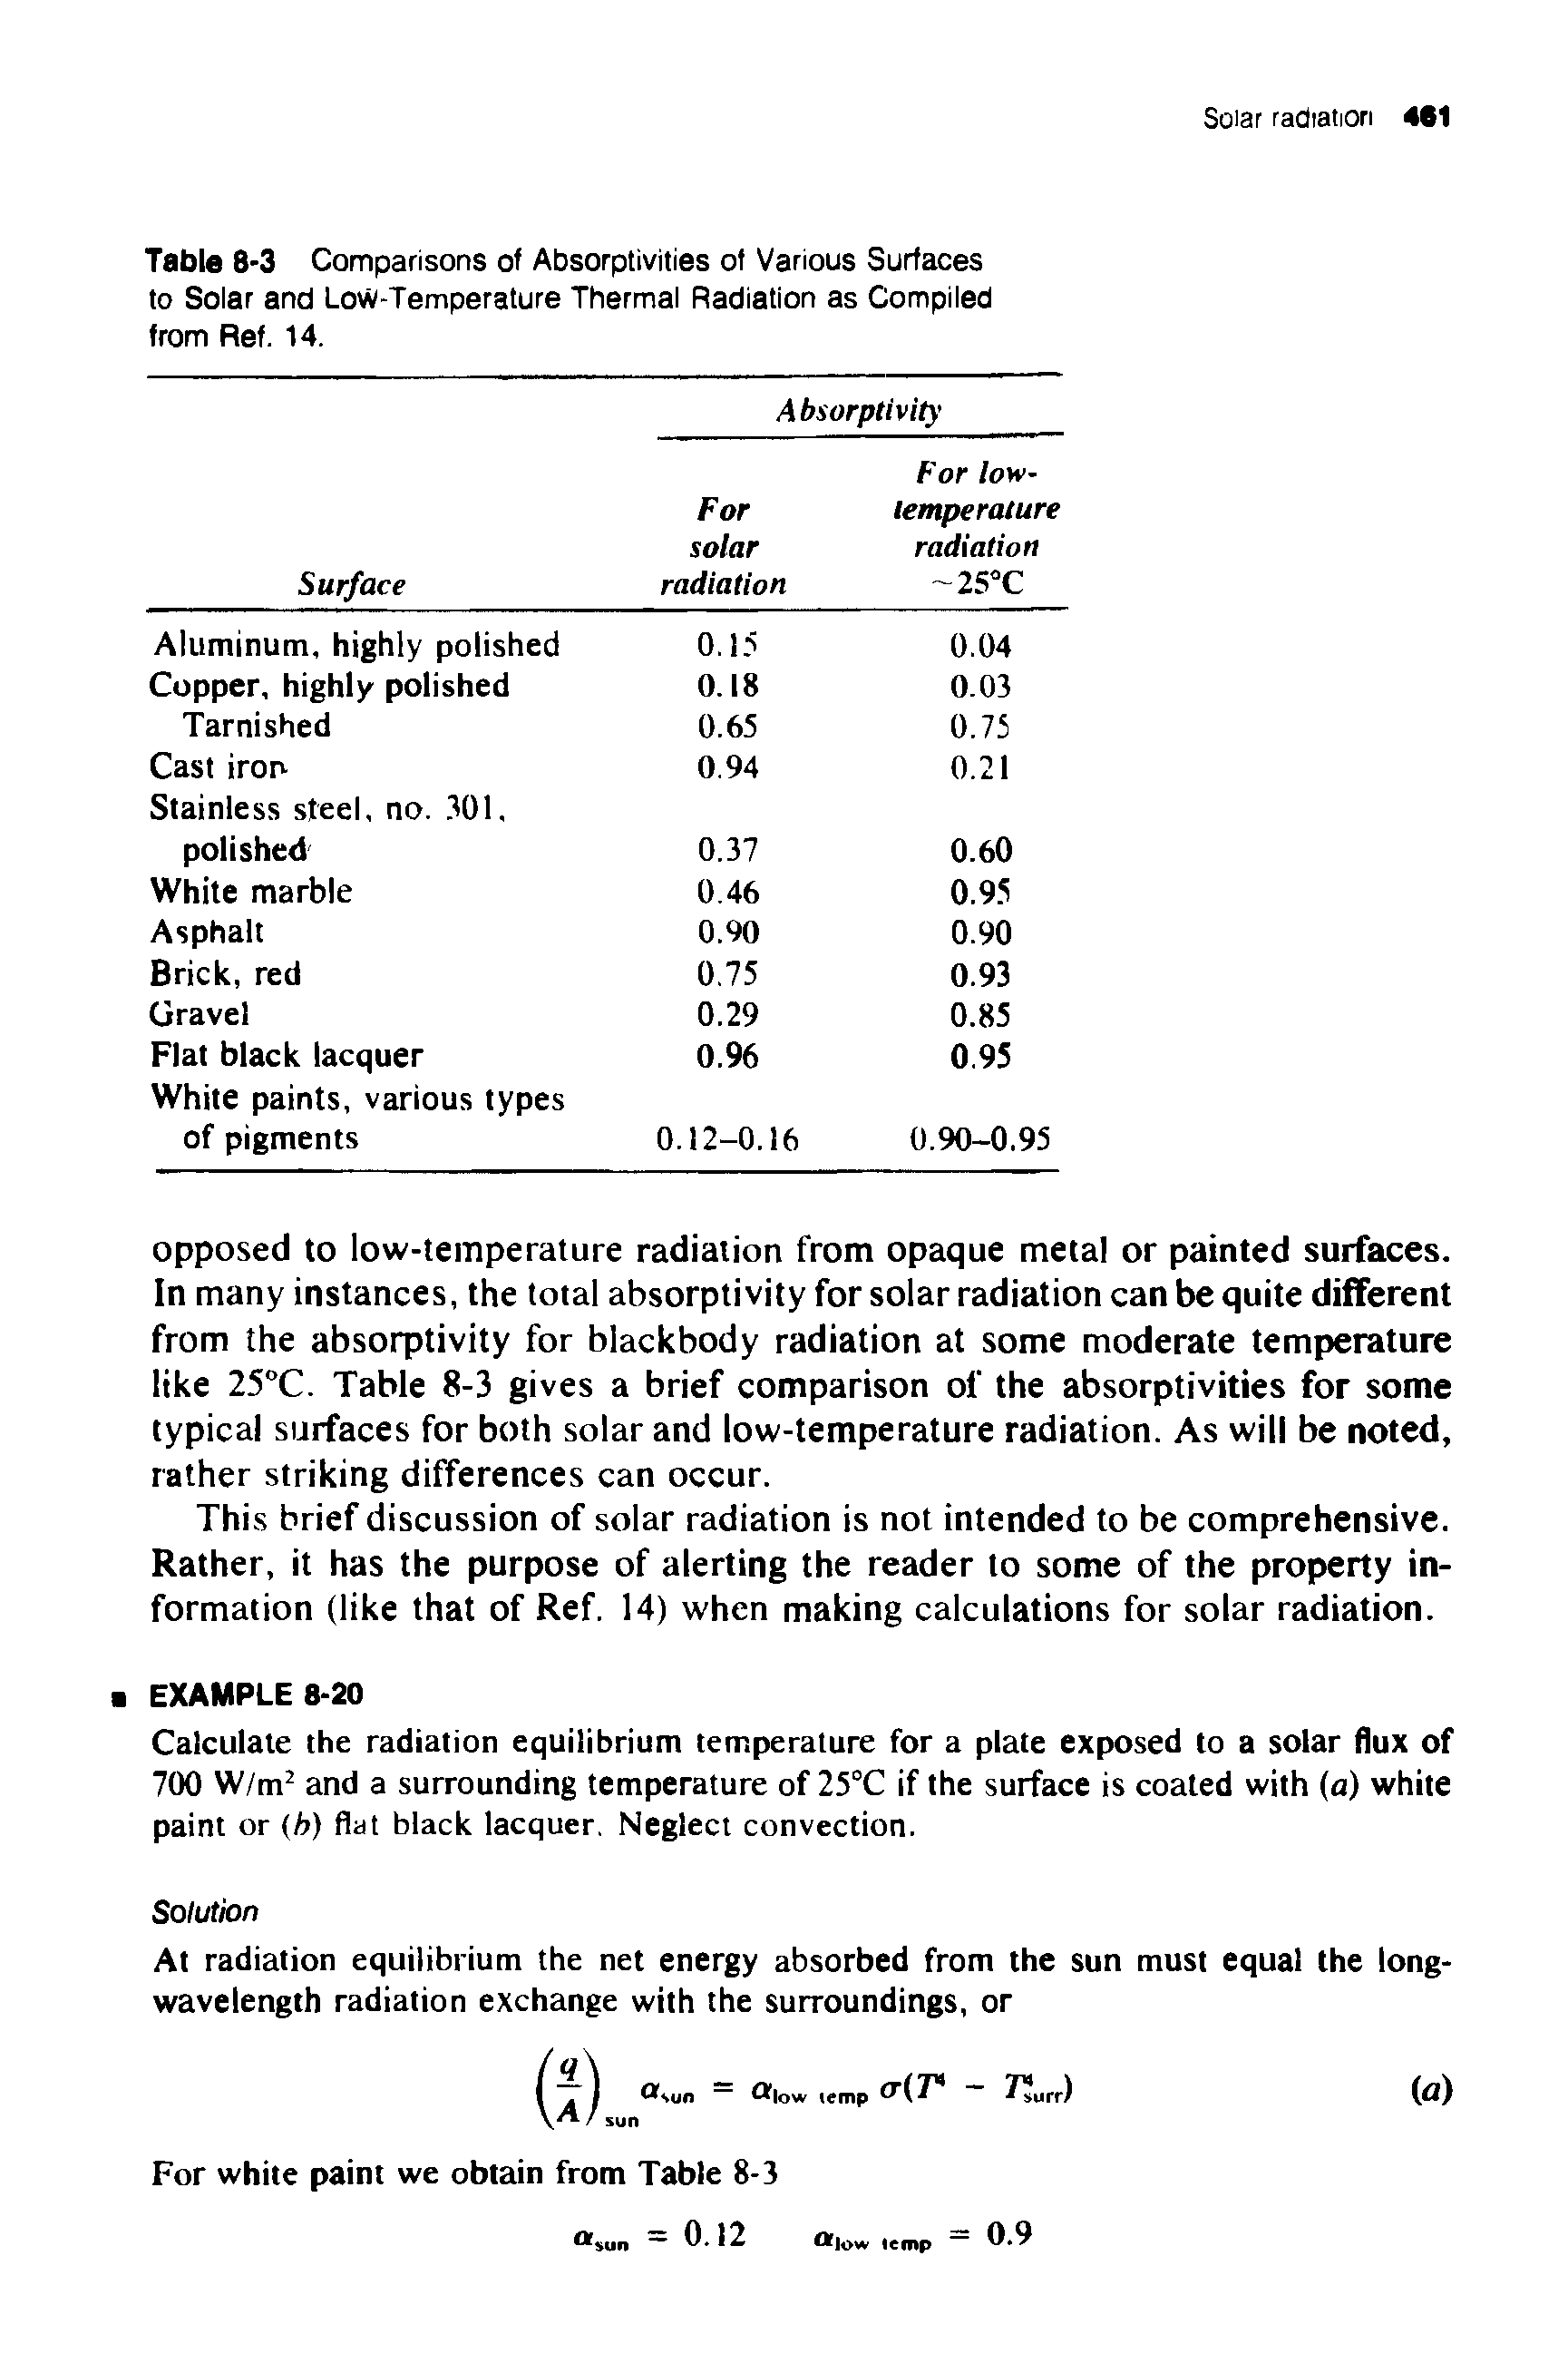 Table 8-3 Comparisons of Absorptivities of Various Surfaces to Solar and Low-Temperature Thermal Radiation as Compiled from Ref. 14.